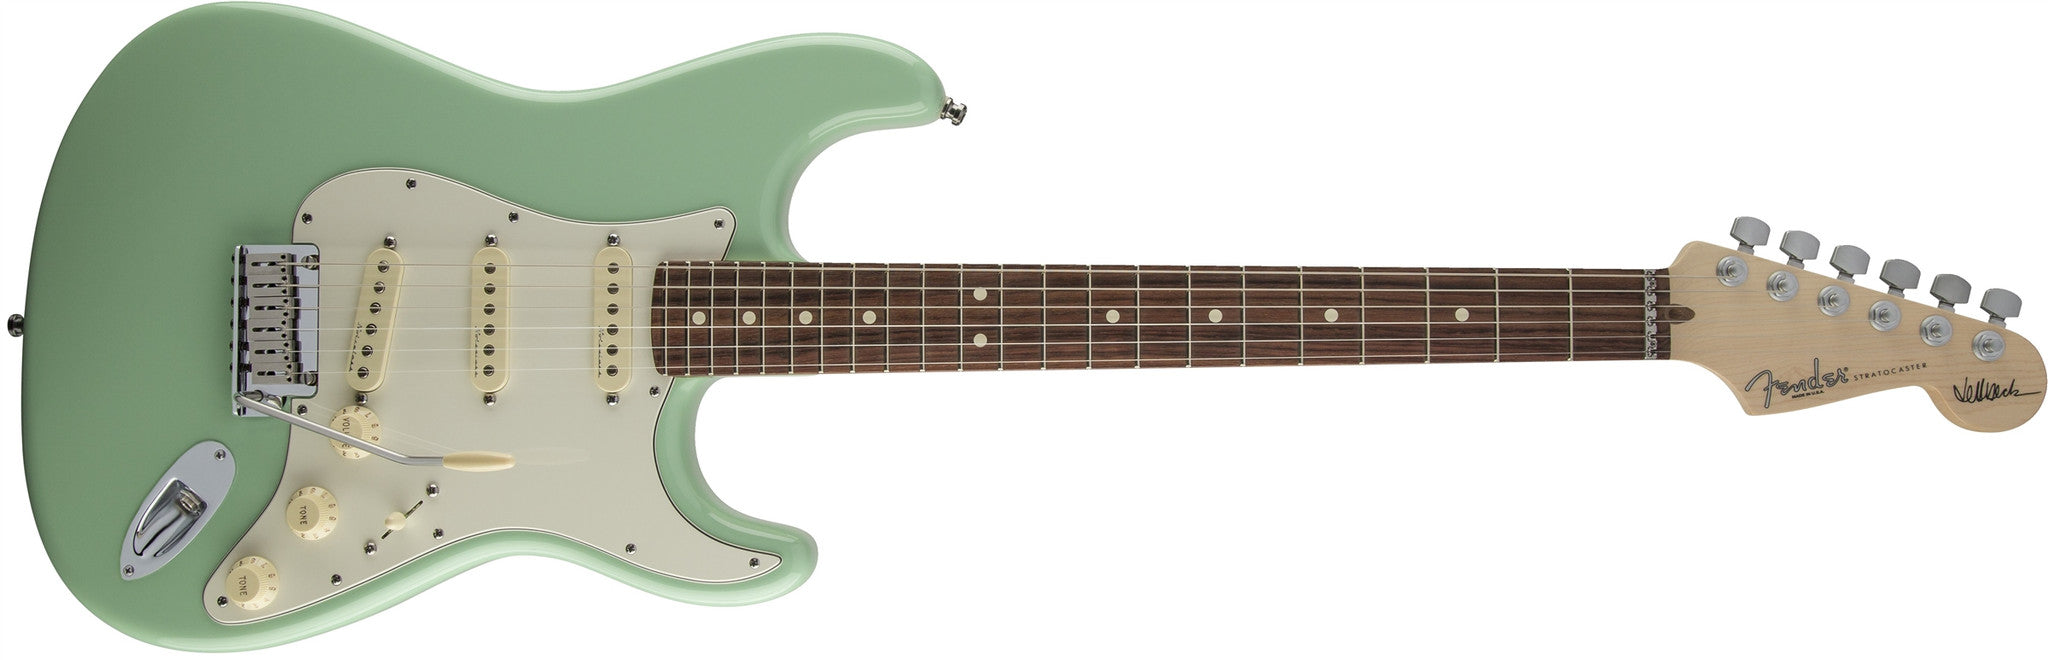 Fender Jeff Beck Stratocaster®, Rosewood Fingerboard, Surf Green 0119600857 - L.A. Music - Canada's Favourite Music Store!